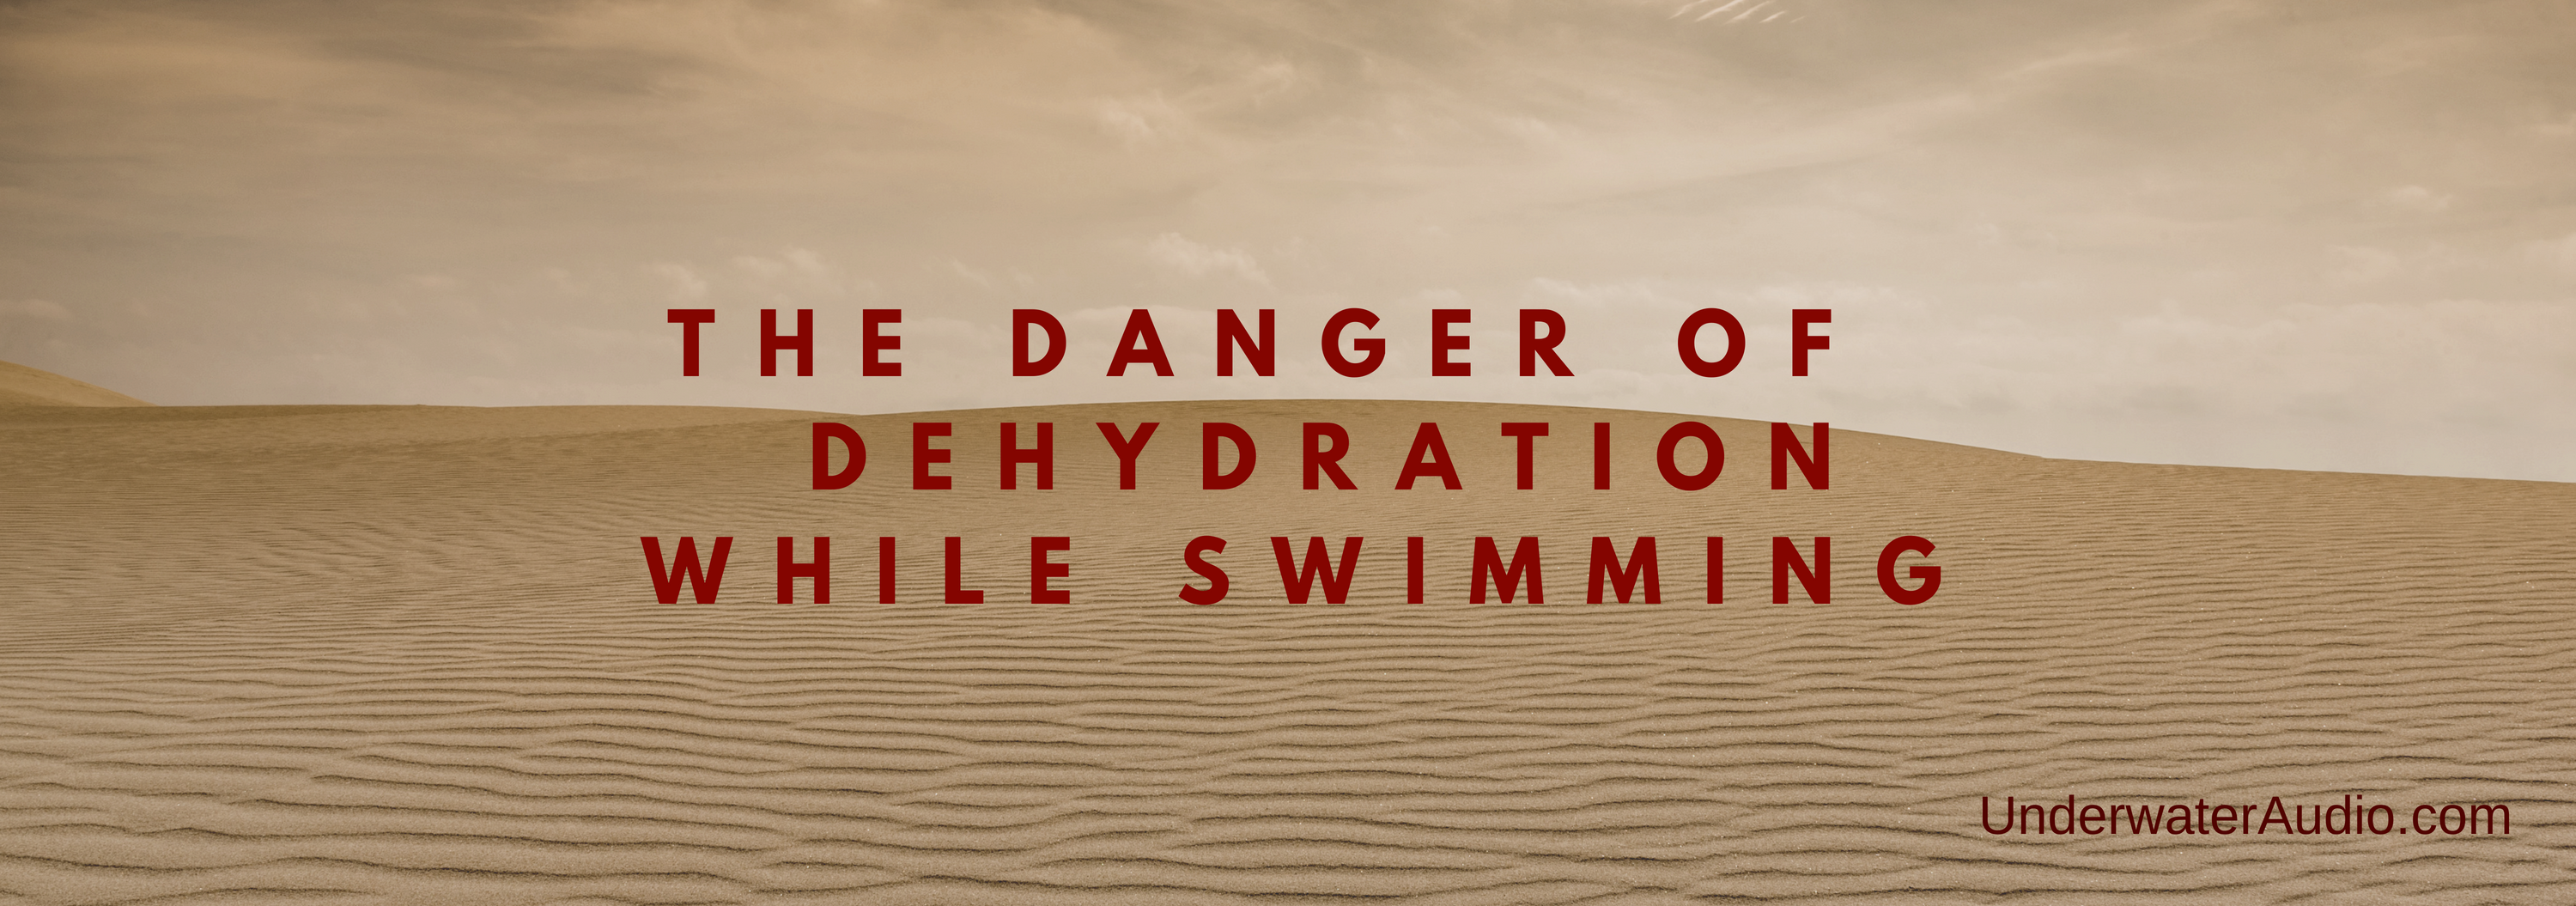 Caution: The Danger of Dehydration While Swimming